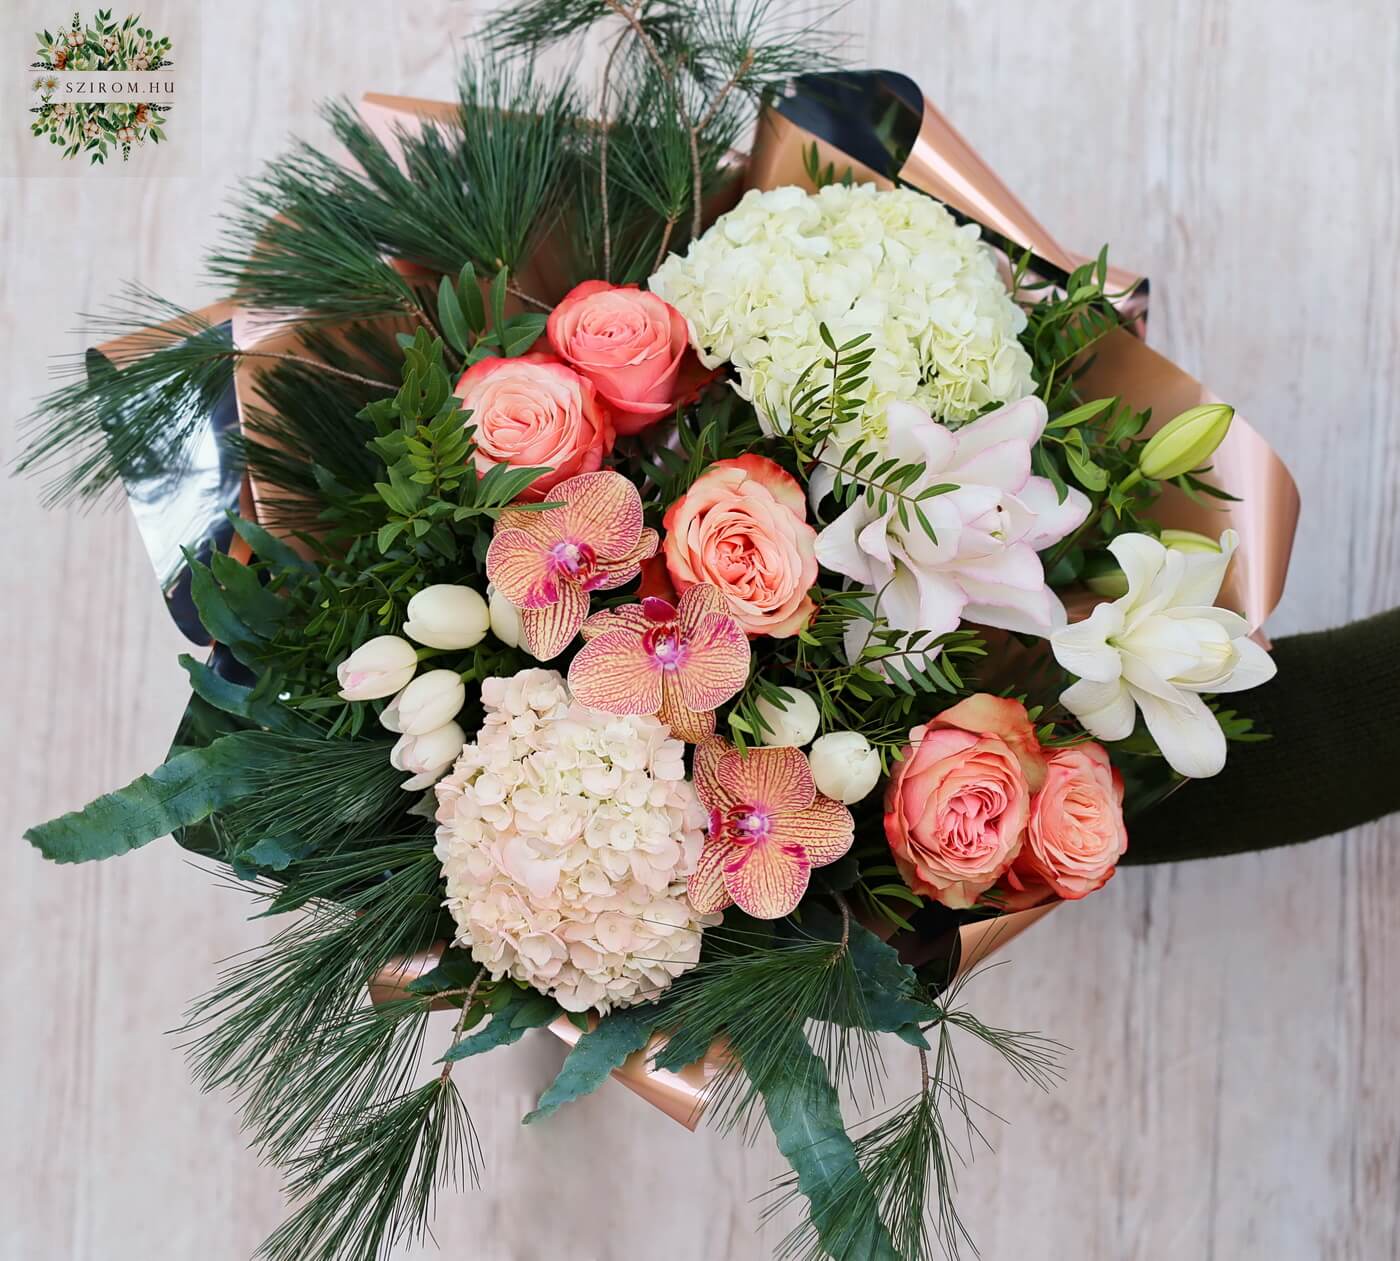 flower delivery Budapest - Big bouquet with peach roses, hydrangeas, orchids, tulips, lilies (19 stems)